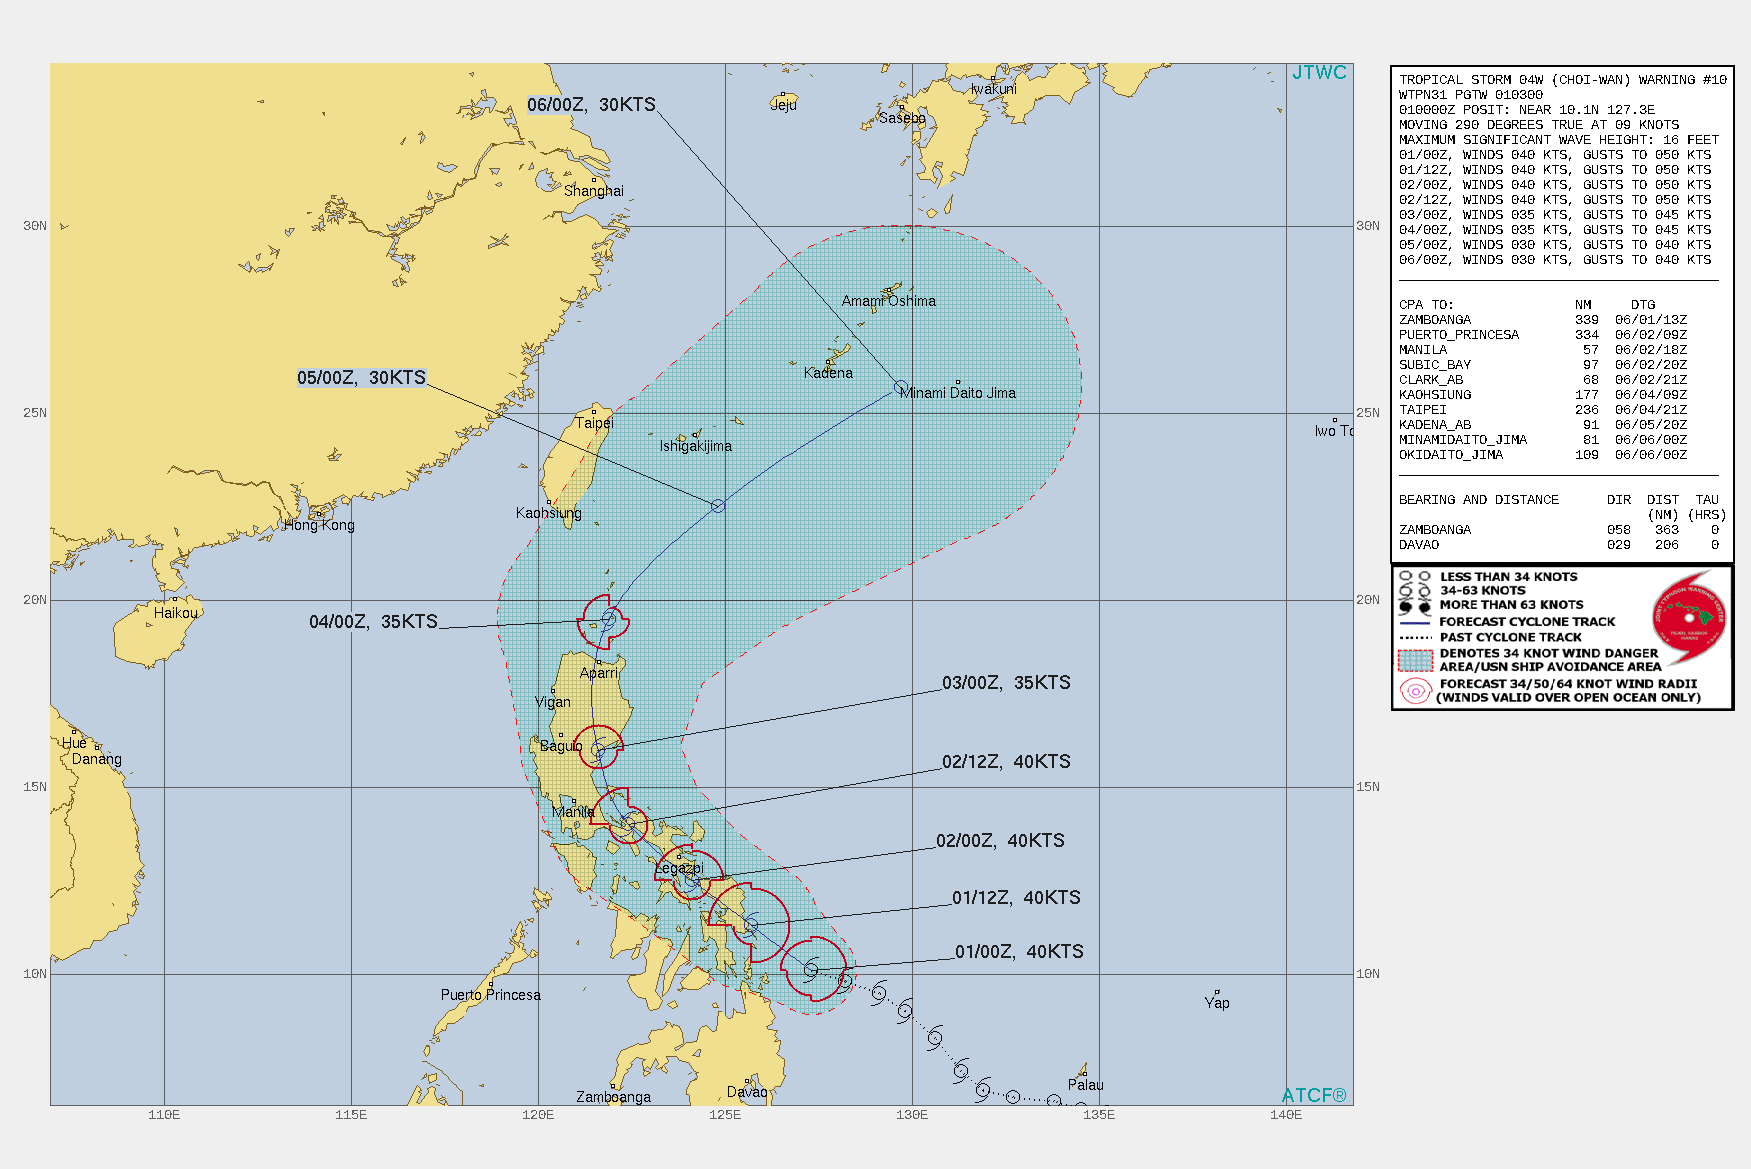 TS 04W. WARNING 10 ISSUED AT 01/03UTC.THE SYSTEM IS LOCATED WITHIN A MARGINALLY-FAVORABLE ENVIRONMENT WITH  NORTHEASTERLY VERTICAL WIND SHEAR (VWS) OFFSET BY GOOD EQUATORWARD  OUTFLOW AND WARM SST VALUES (29-30C). TS 04W HAS DECOUPLED AND IS  TRACKING WEST-NORTHWESTWARD UNDER THE STEERING INFLUENCE OF A DEEP- LAYERED SUBTROPICAL RIDGE (STR) POSITIONED TO THE NORTH AND  NORTHEAST. AFTER 72H, THE WESTERN PORTIONS OF THE STR WILL  CONTINUE TO ERODE ALLOWING THE SYSTEM TO RECURVE NORTHEASTWARD. TS  04W WILL WEAKEN AS IT ENCOUNTERS INCREASING VWS ASSOCIATED WITH A  MIDLATITUDE SHORTWAVE TROUGH EXPECTED TO DIG OVER THE EAST CHINA  SEA. TS 04W IS EXPECTED TO BEGIN EXTRA-TROPICAL TRANSITION (ETT)  NEAR 96H BUT MAY DISSIPATE PRIOR TO COMPLETING ETT NEAR 120H.